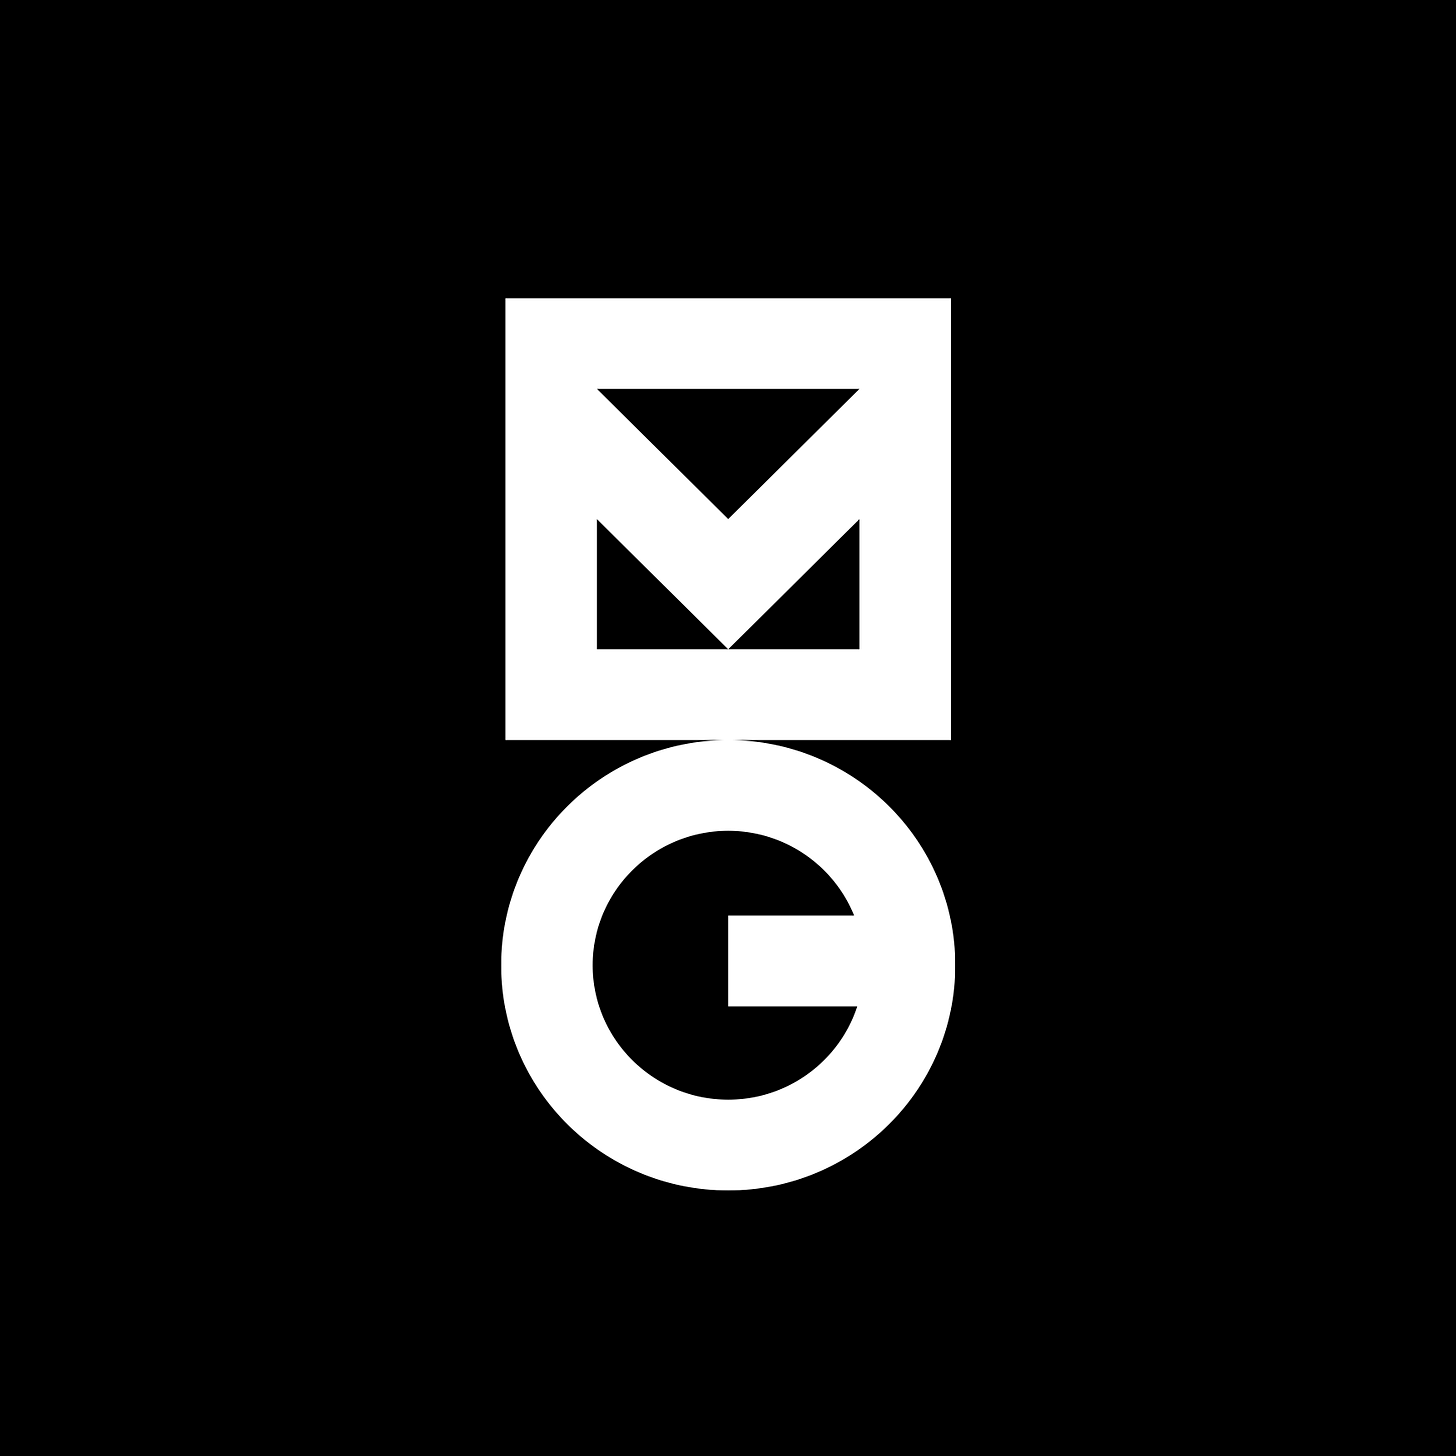 Gérard Guerre and Technes' 1966 logo for Merlin Gerin, this is a stacked M as a square on top of a circular G